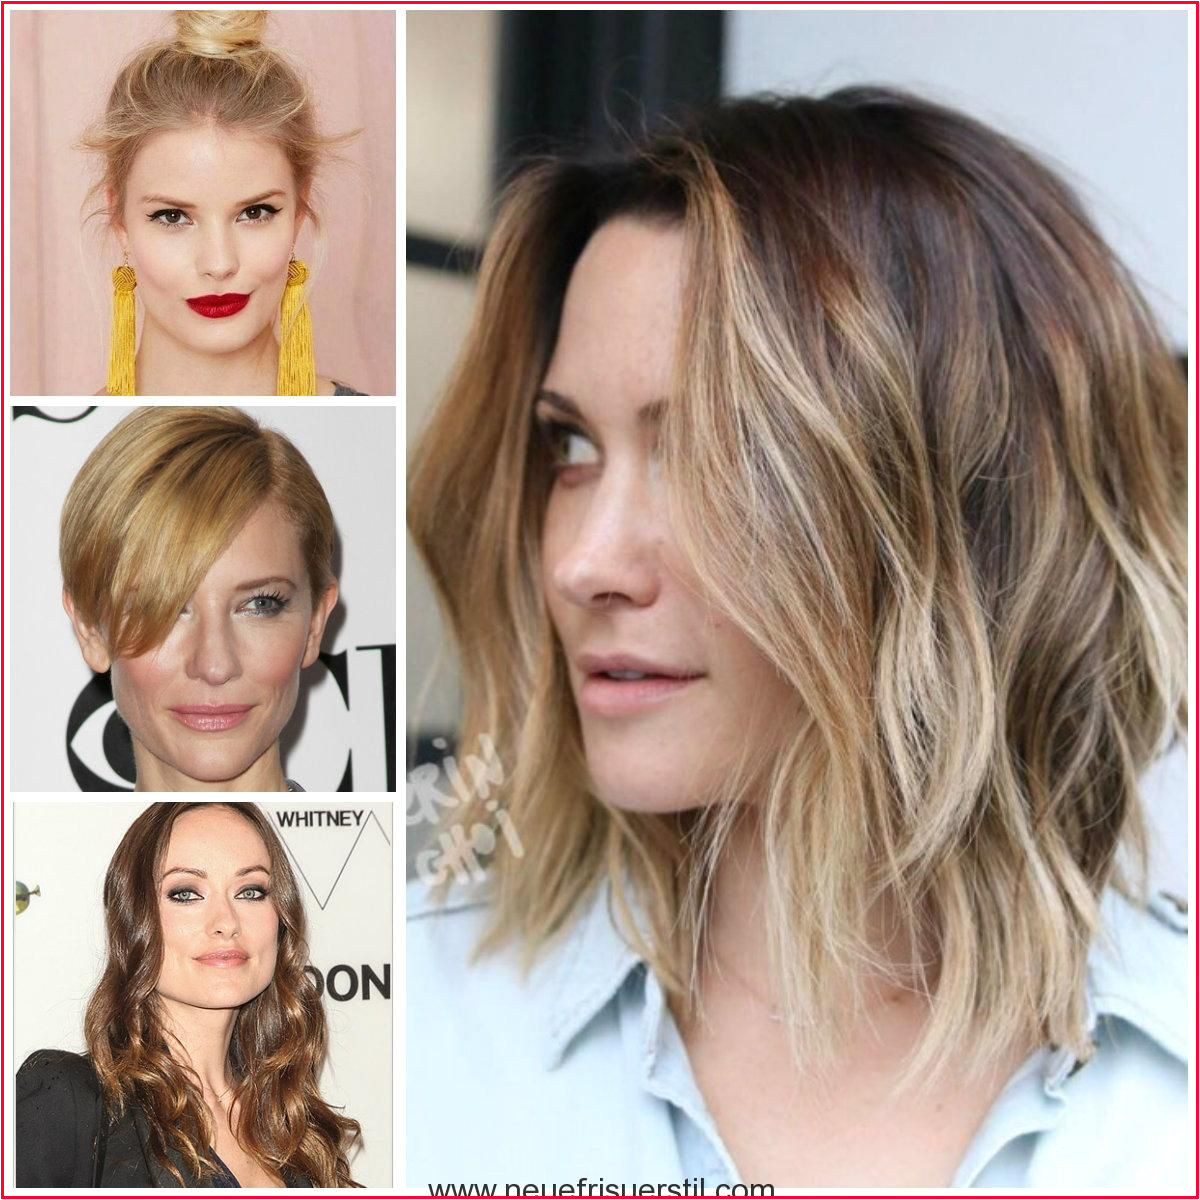 Hairstyles for Women with Square Faces Best Hair Color for Square Face Image Hair Color Trends